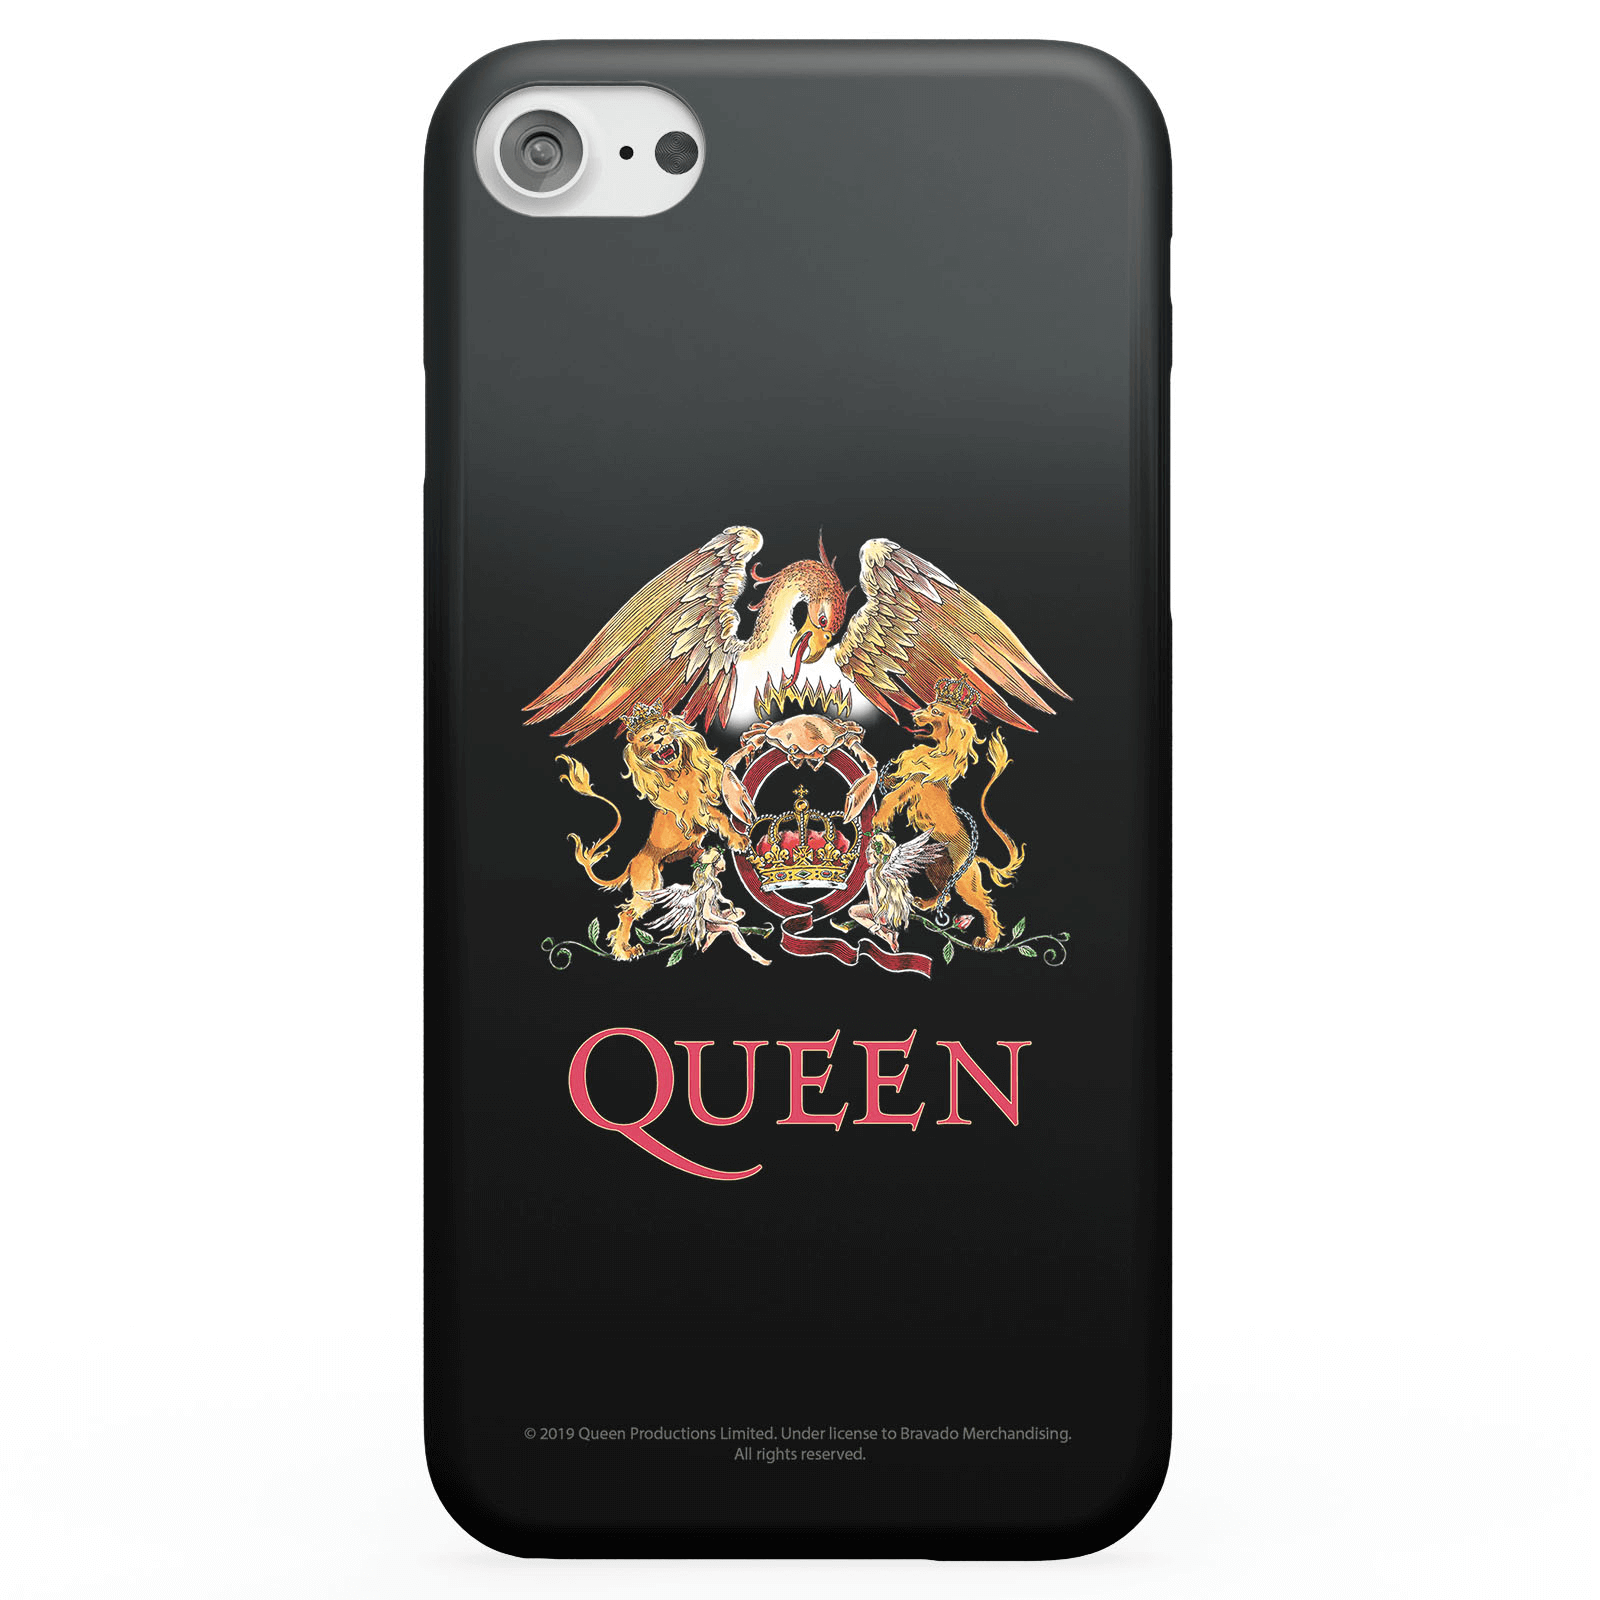 Photos - Case Crest Queen  Phone  for iPhone and Android - iPhone 5C - Tough  - M 